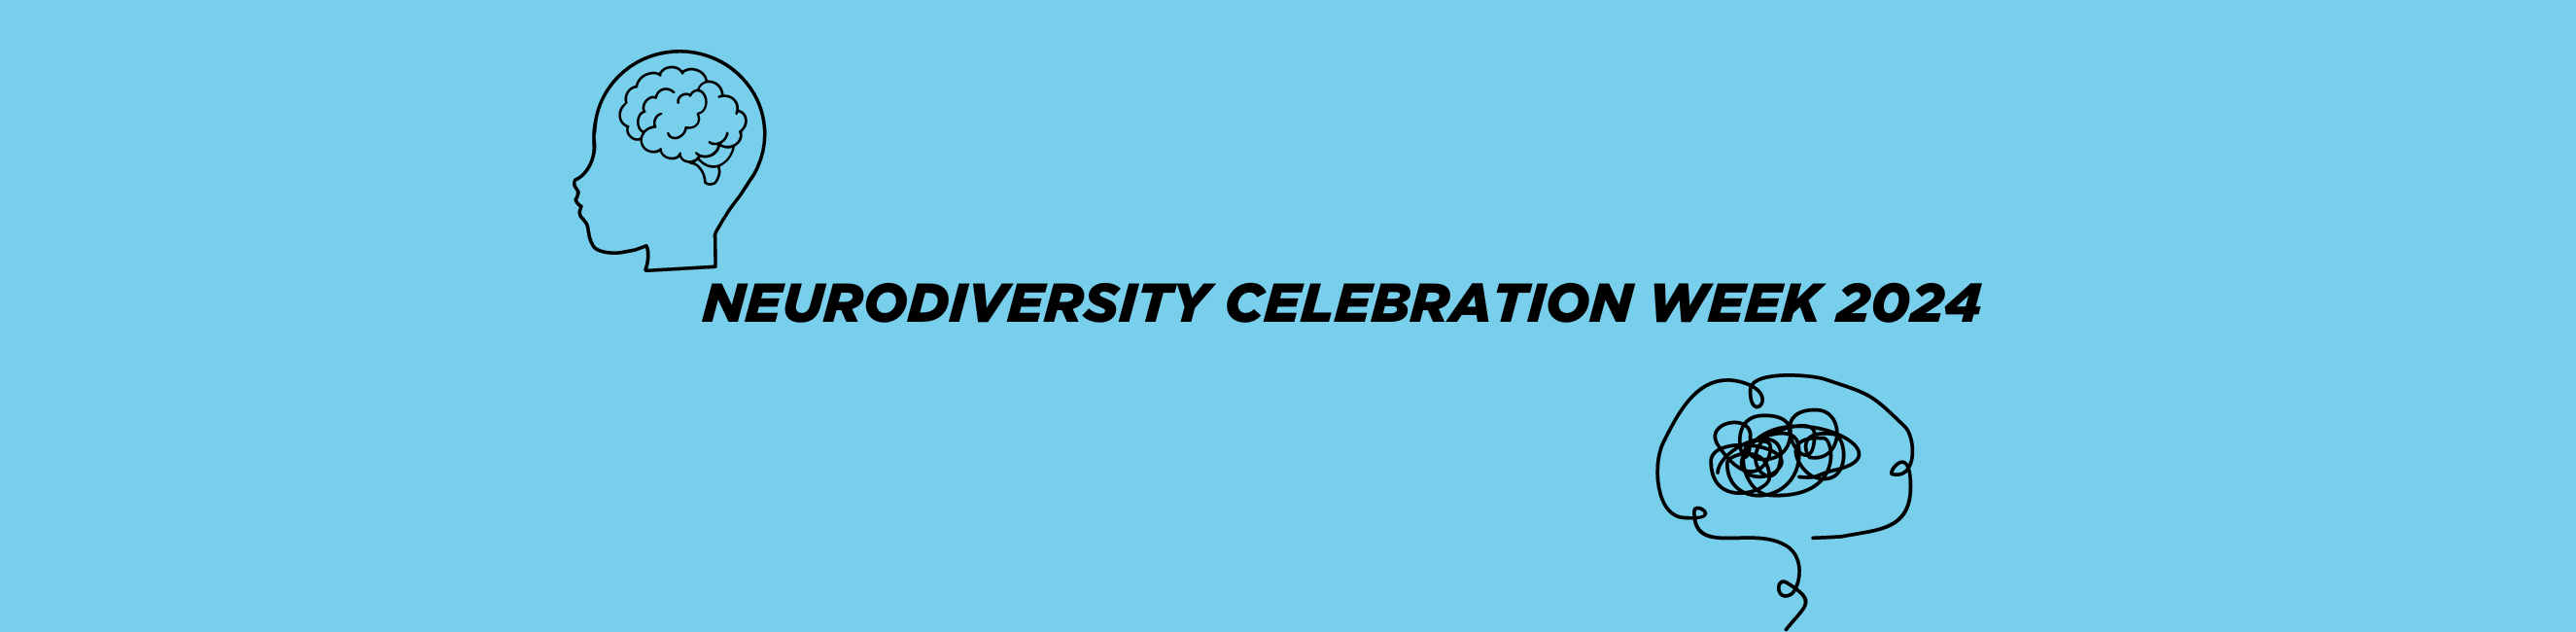 Neurodiversity celebration week banner with a blue background and large black capital text